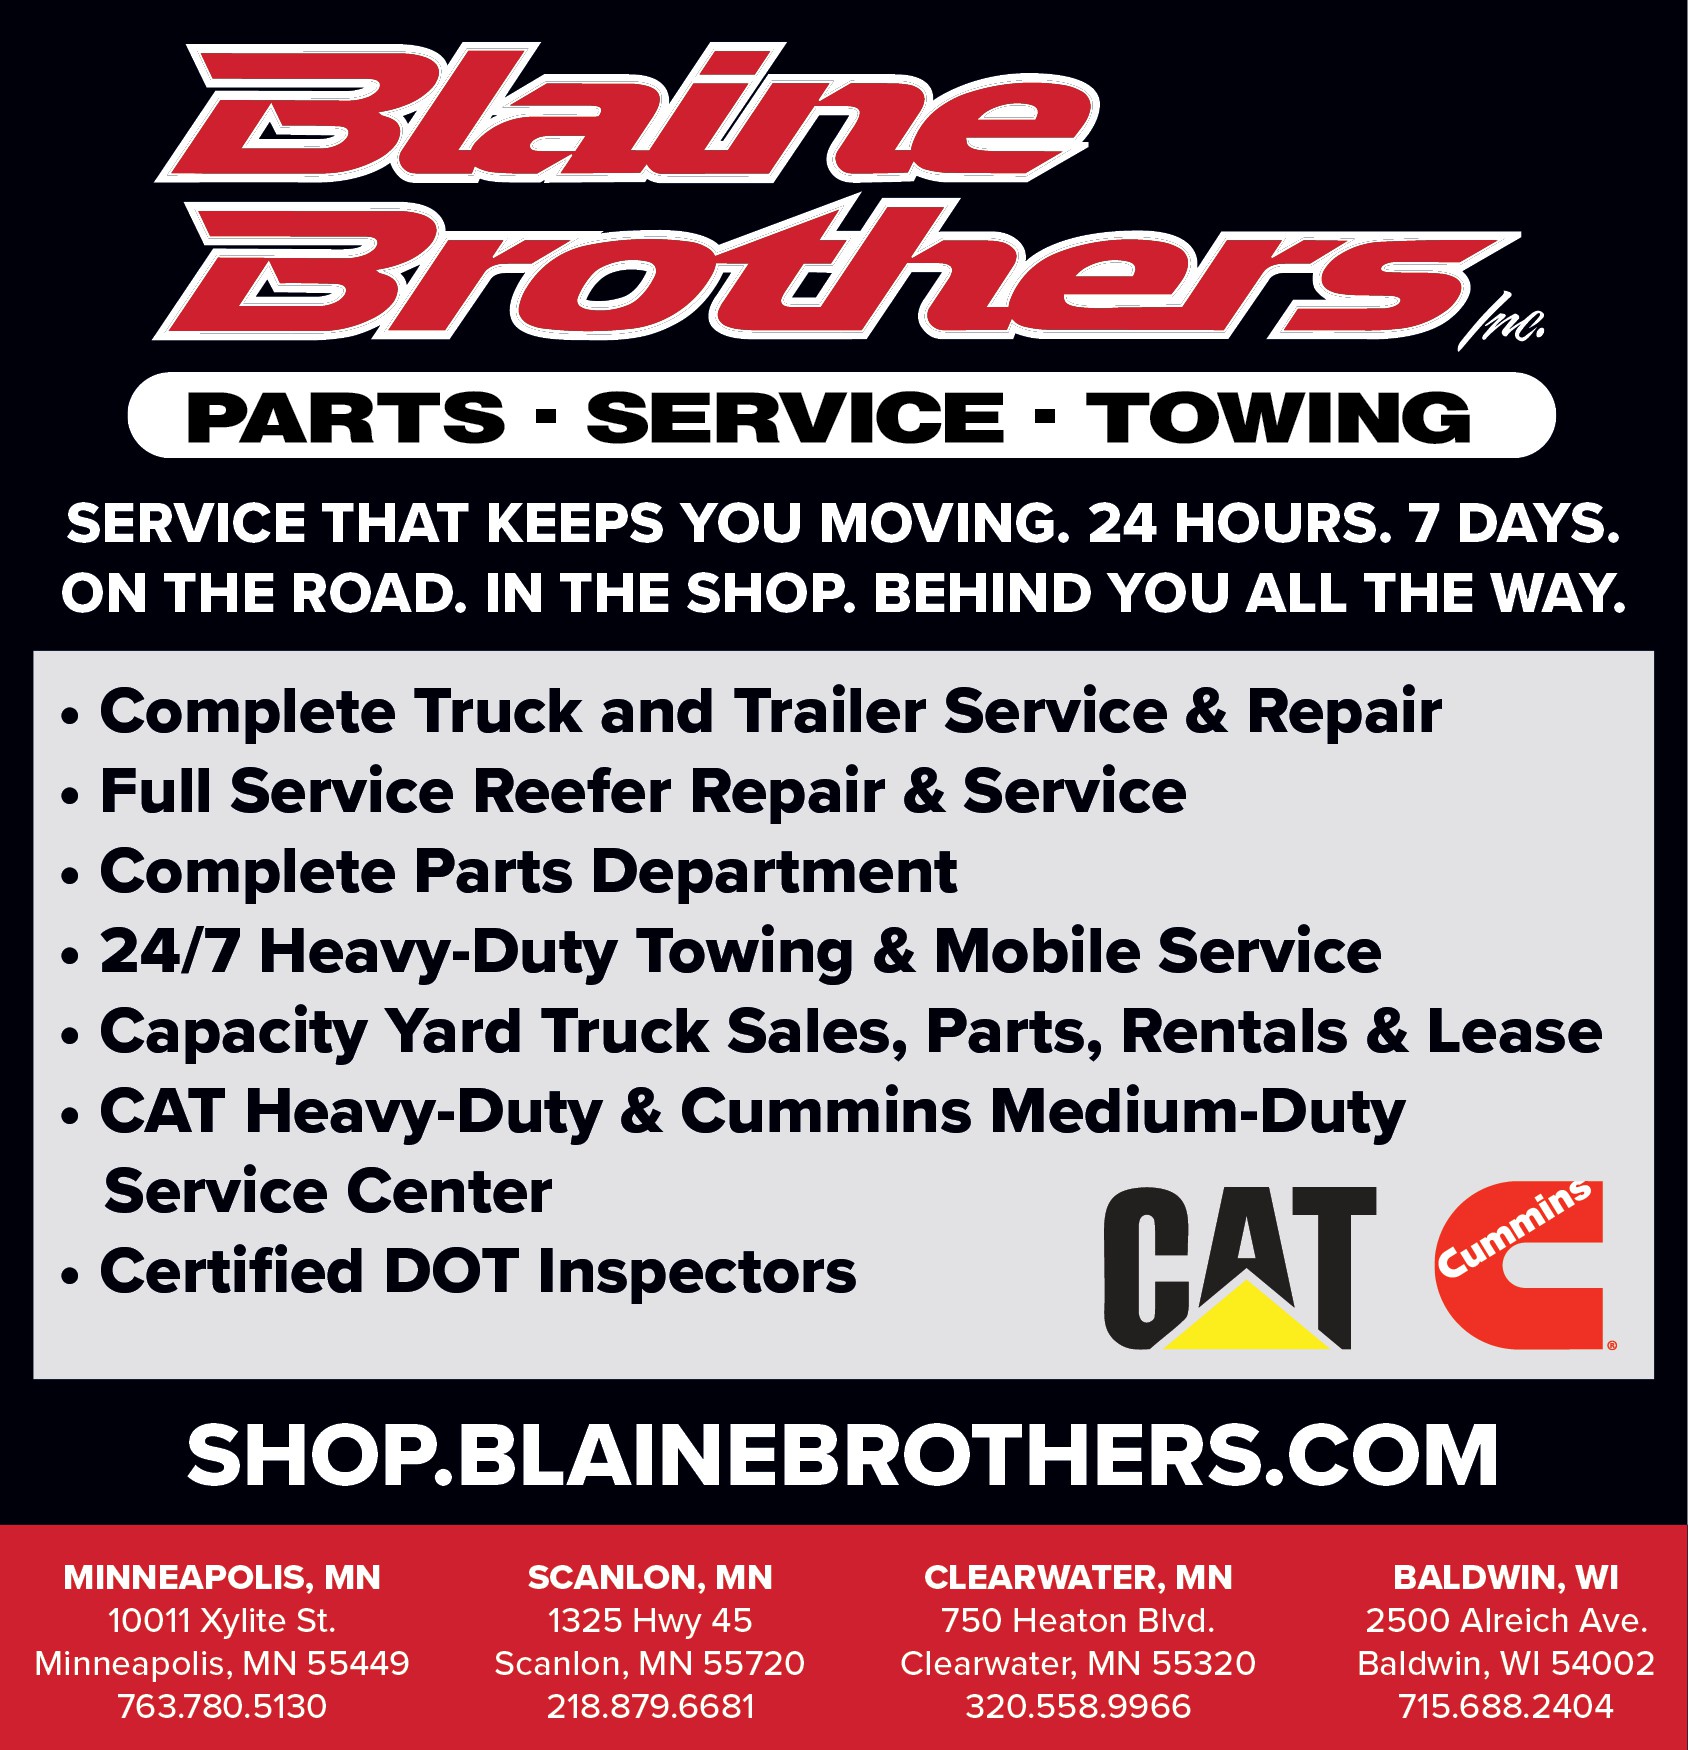 http://www.blainebrothers.com